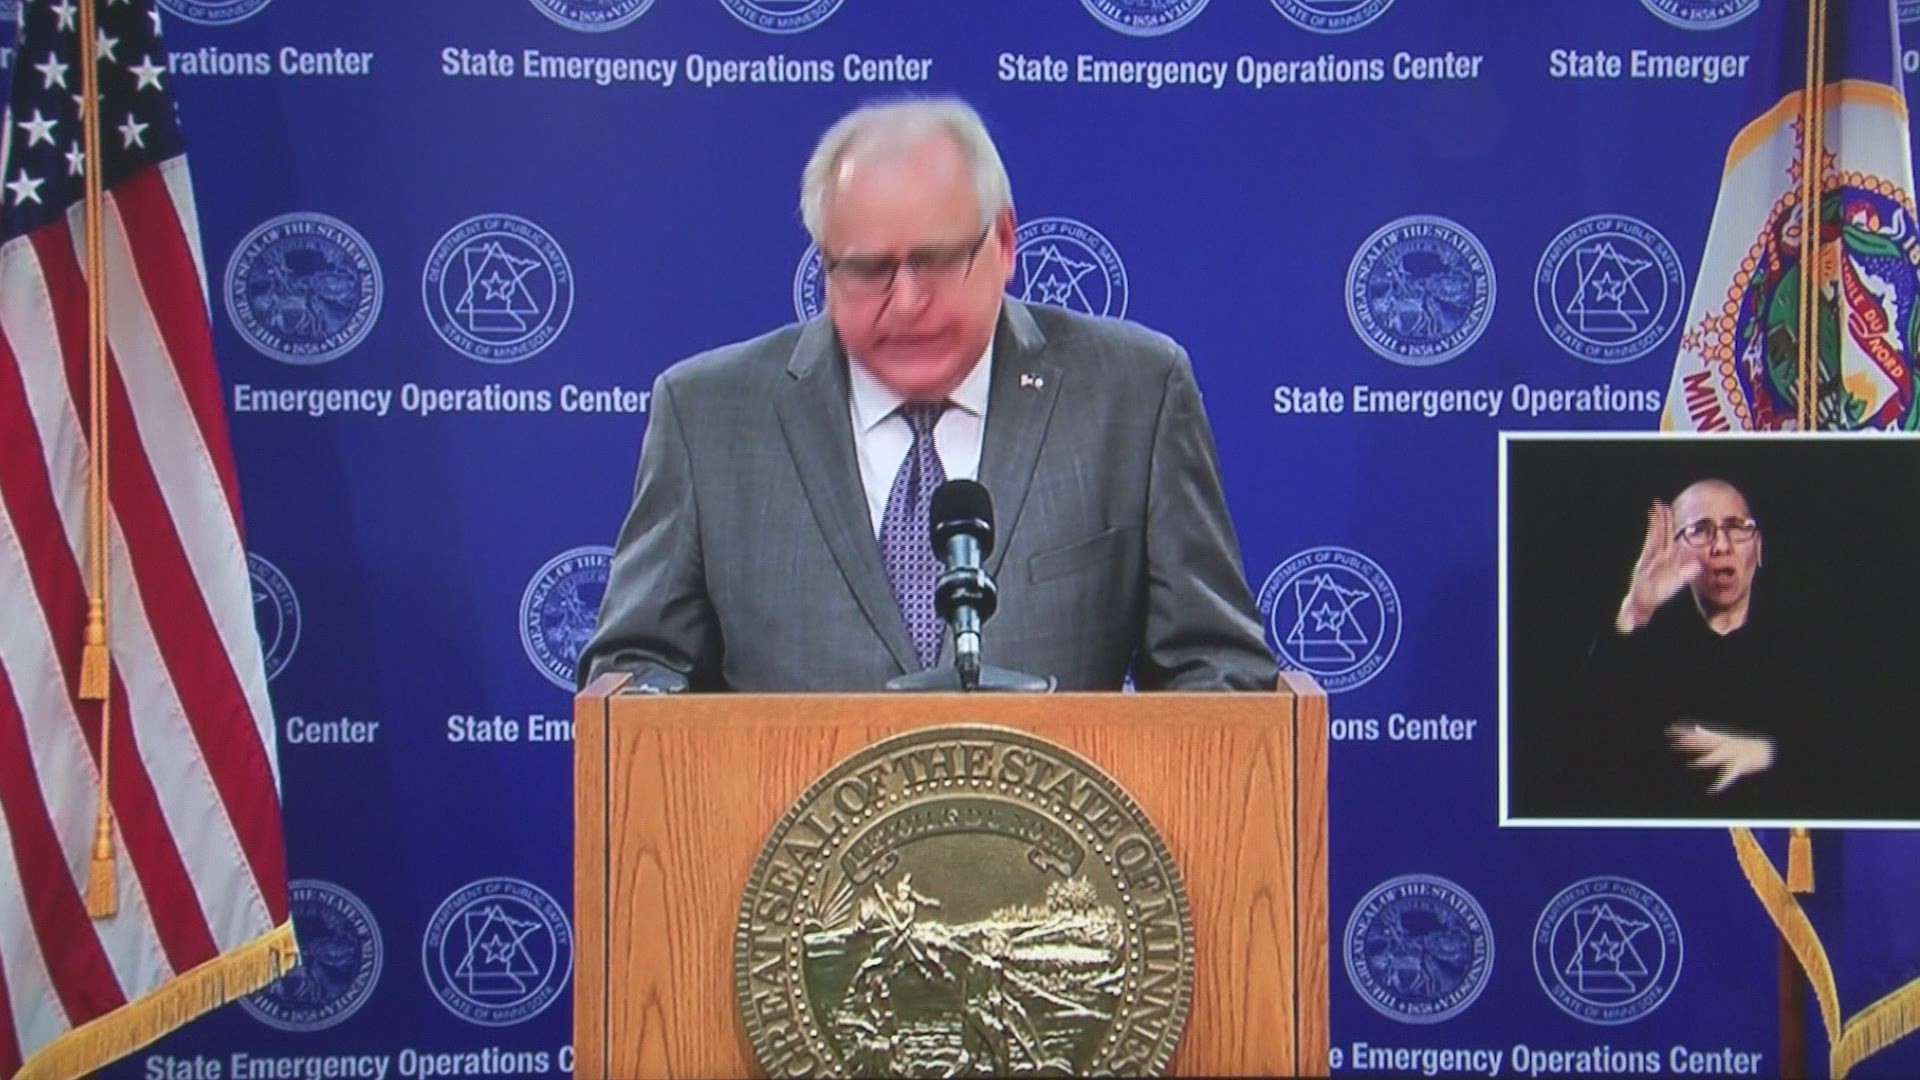 Governor Tim Walz pledged to do everything in his power to ensure a thorough investigation into the death of George Floyd.